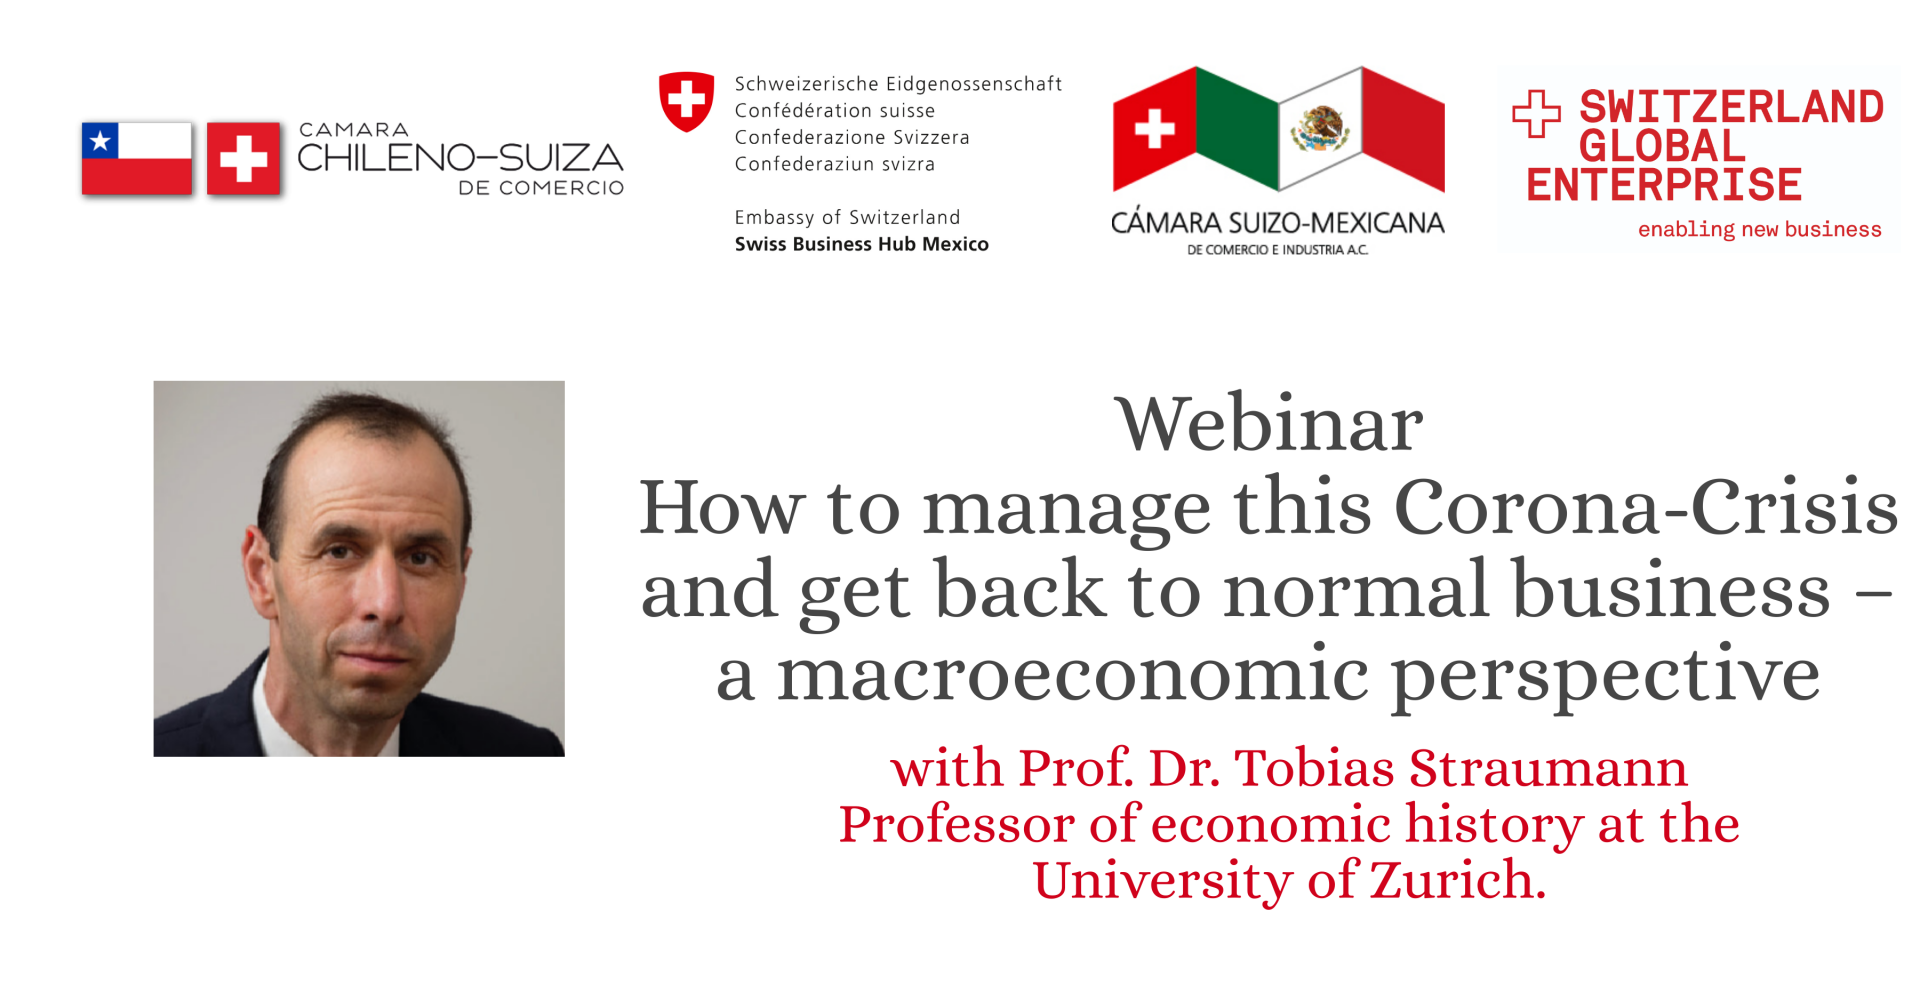 Webinar: How to manage this Corona-Crisis and get back to normal business – a macroeconomic perspective